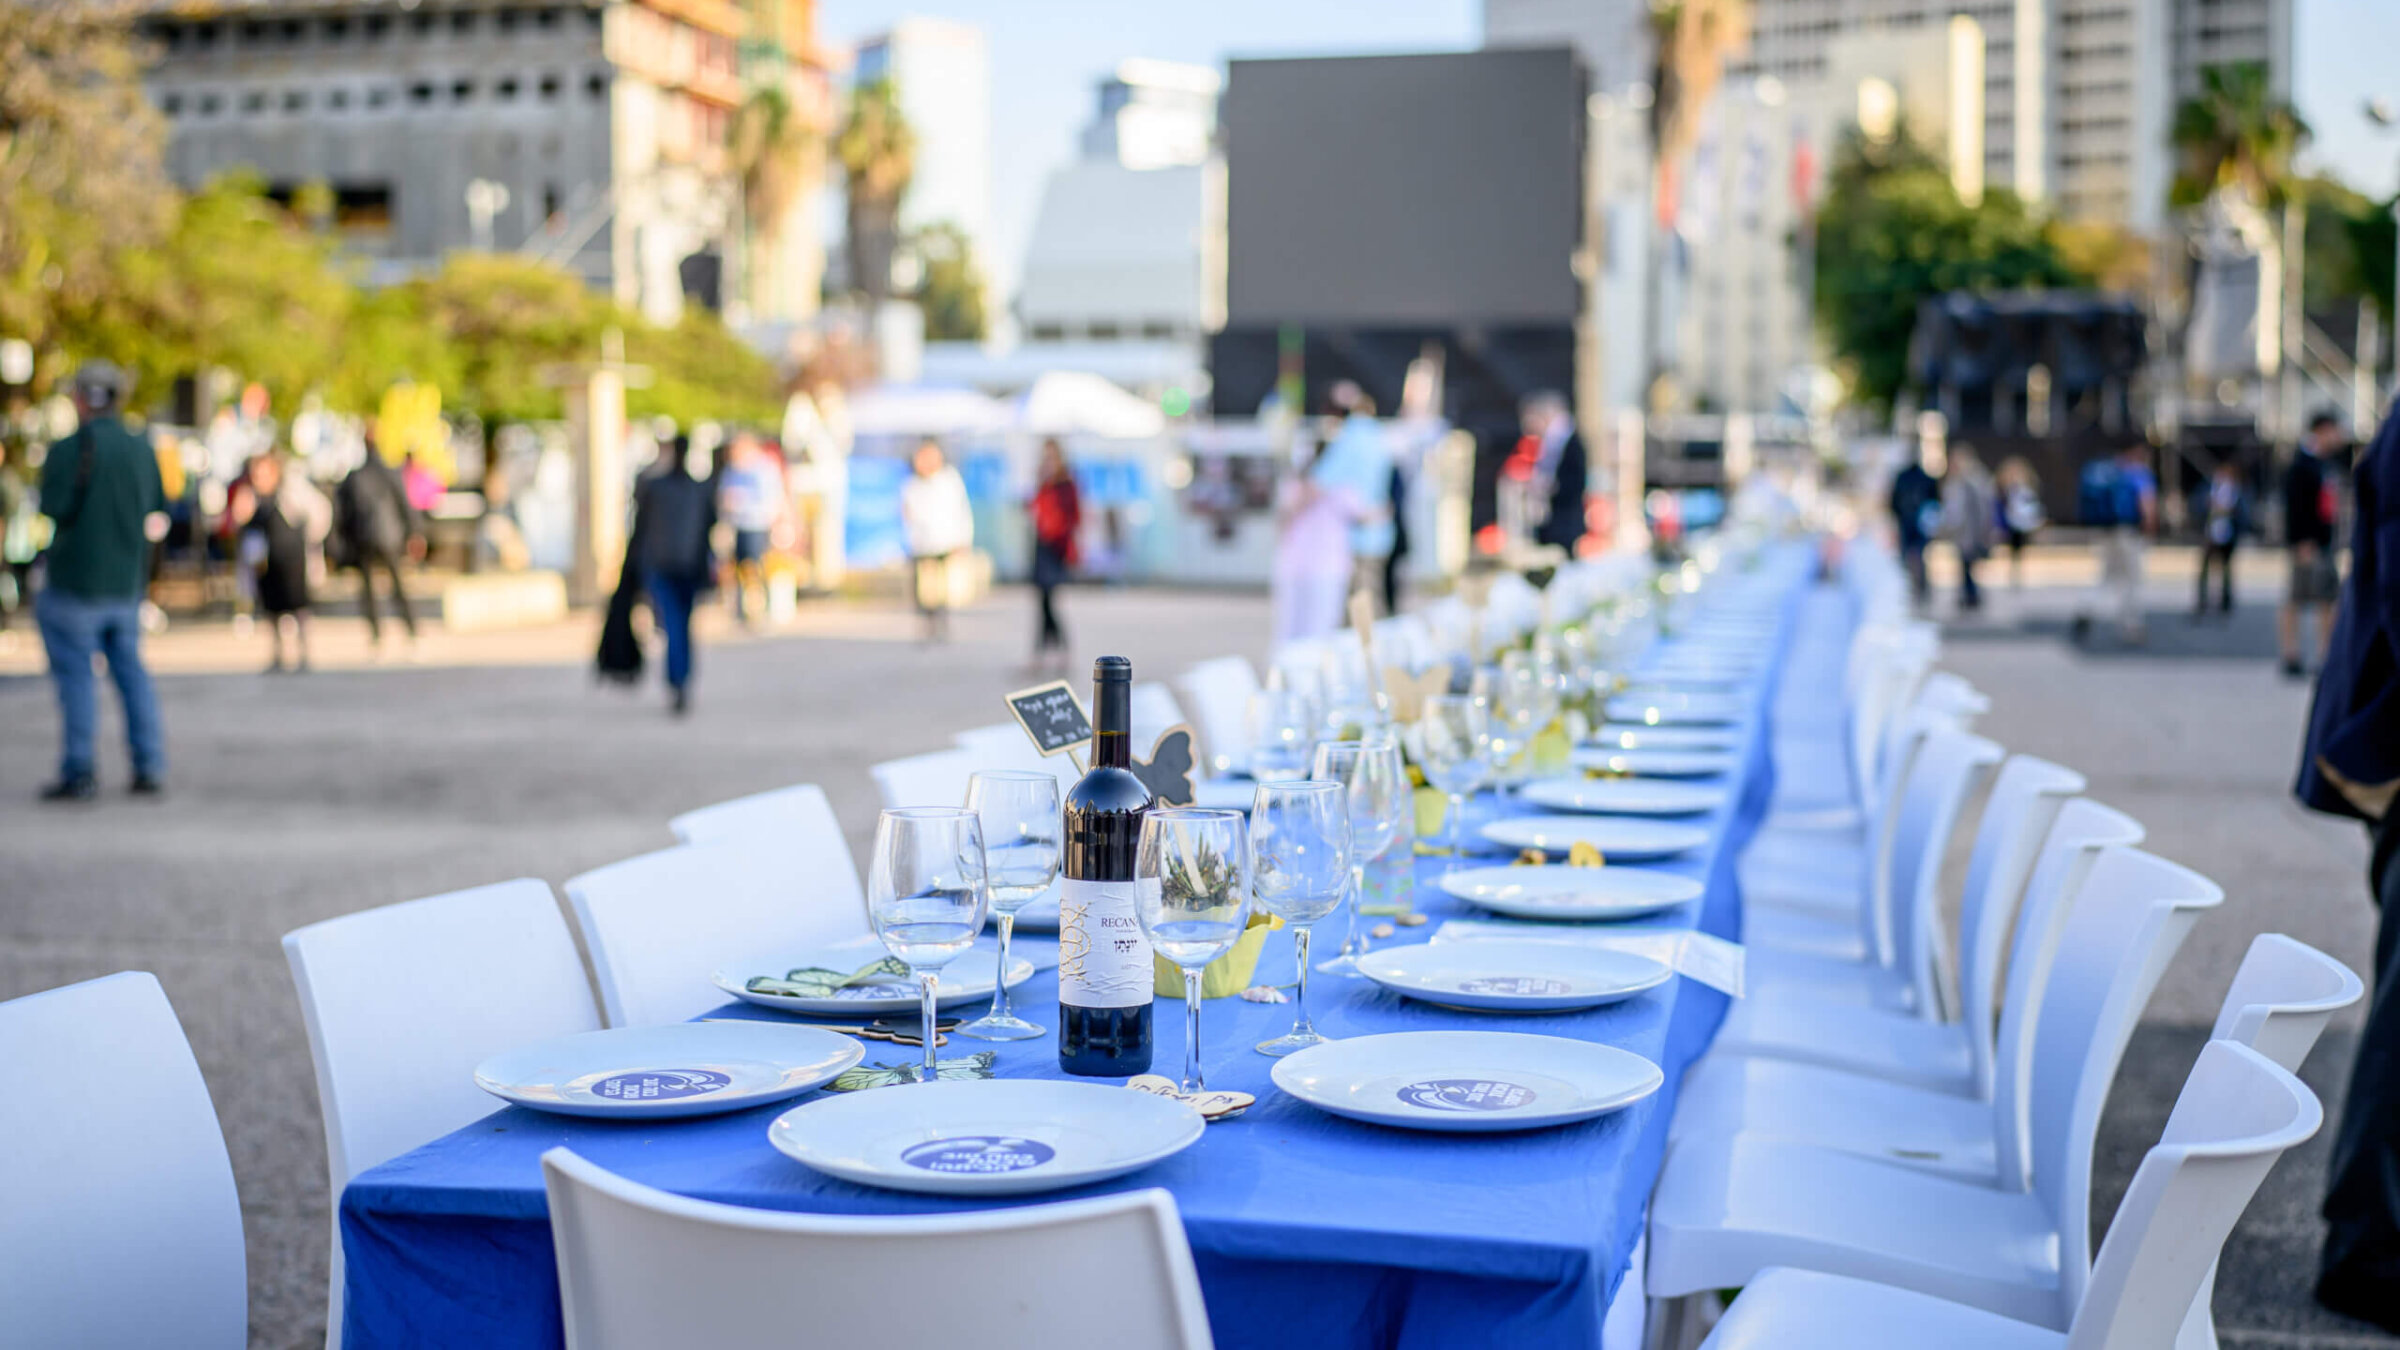 A dinner table is set for the return of the hostages at "Hostages Square," Feb. 21 in Tel Aviv.